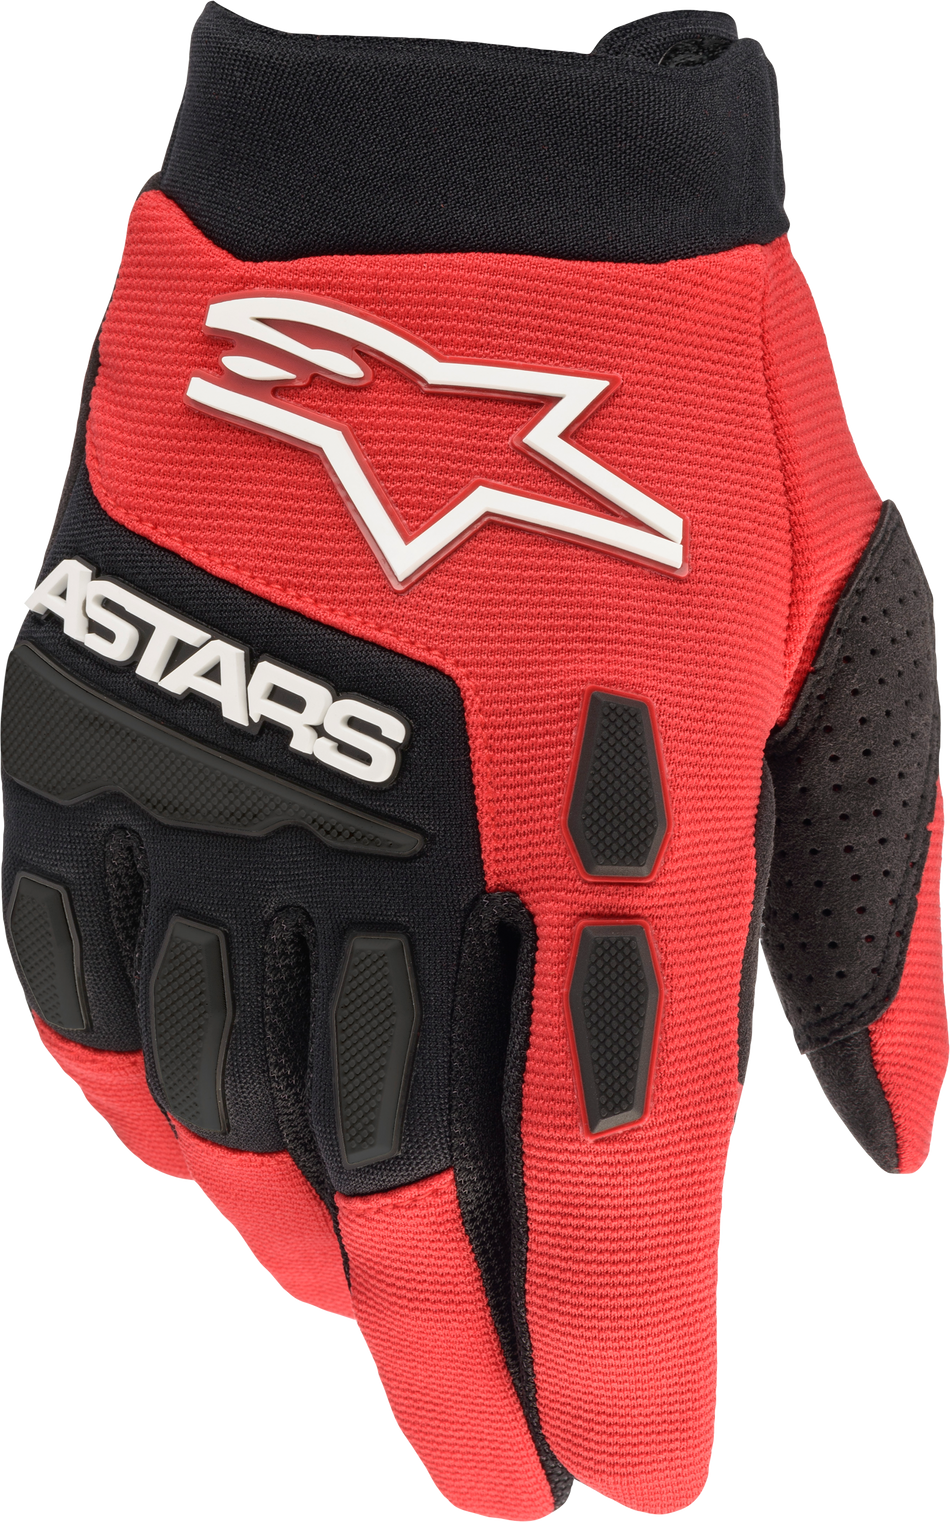 ALPINESTARS Youth & Kids Full Bore Gloves Bright Red/Black Y3xs 3543622-3031-3XS